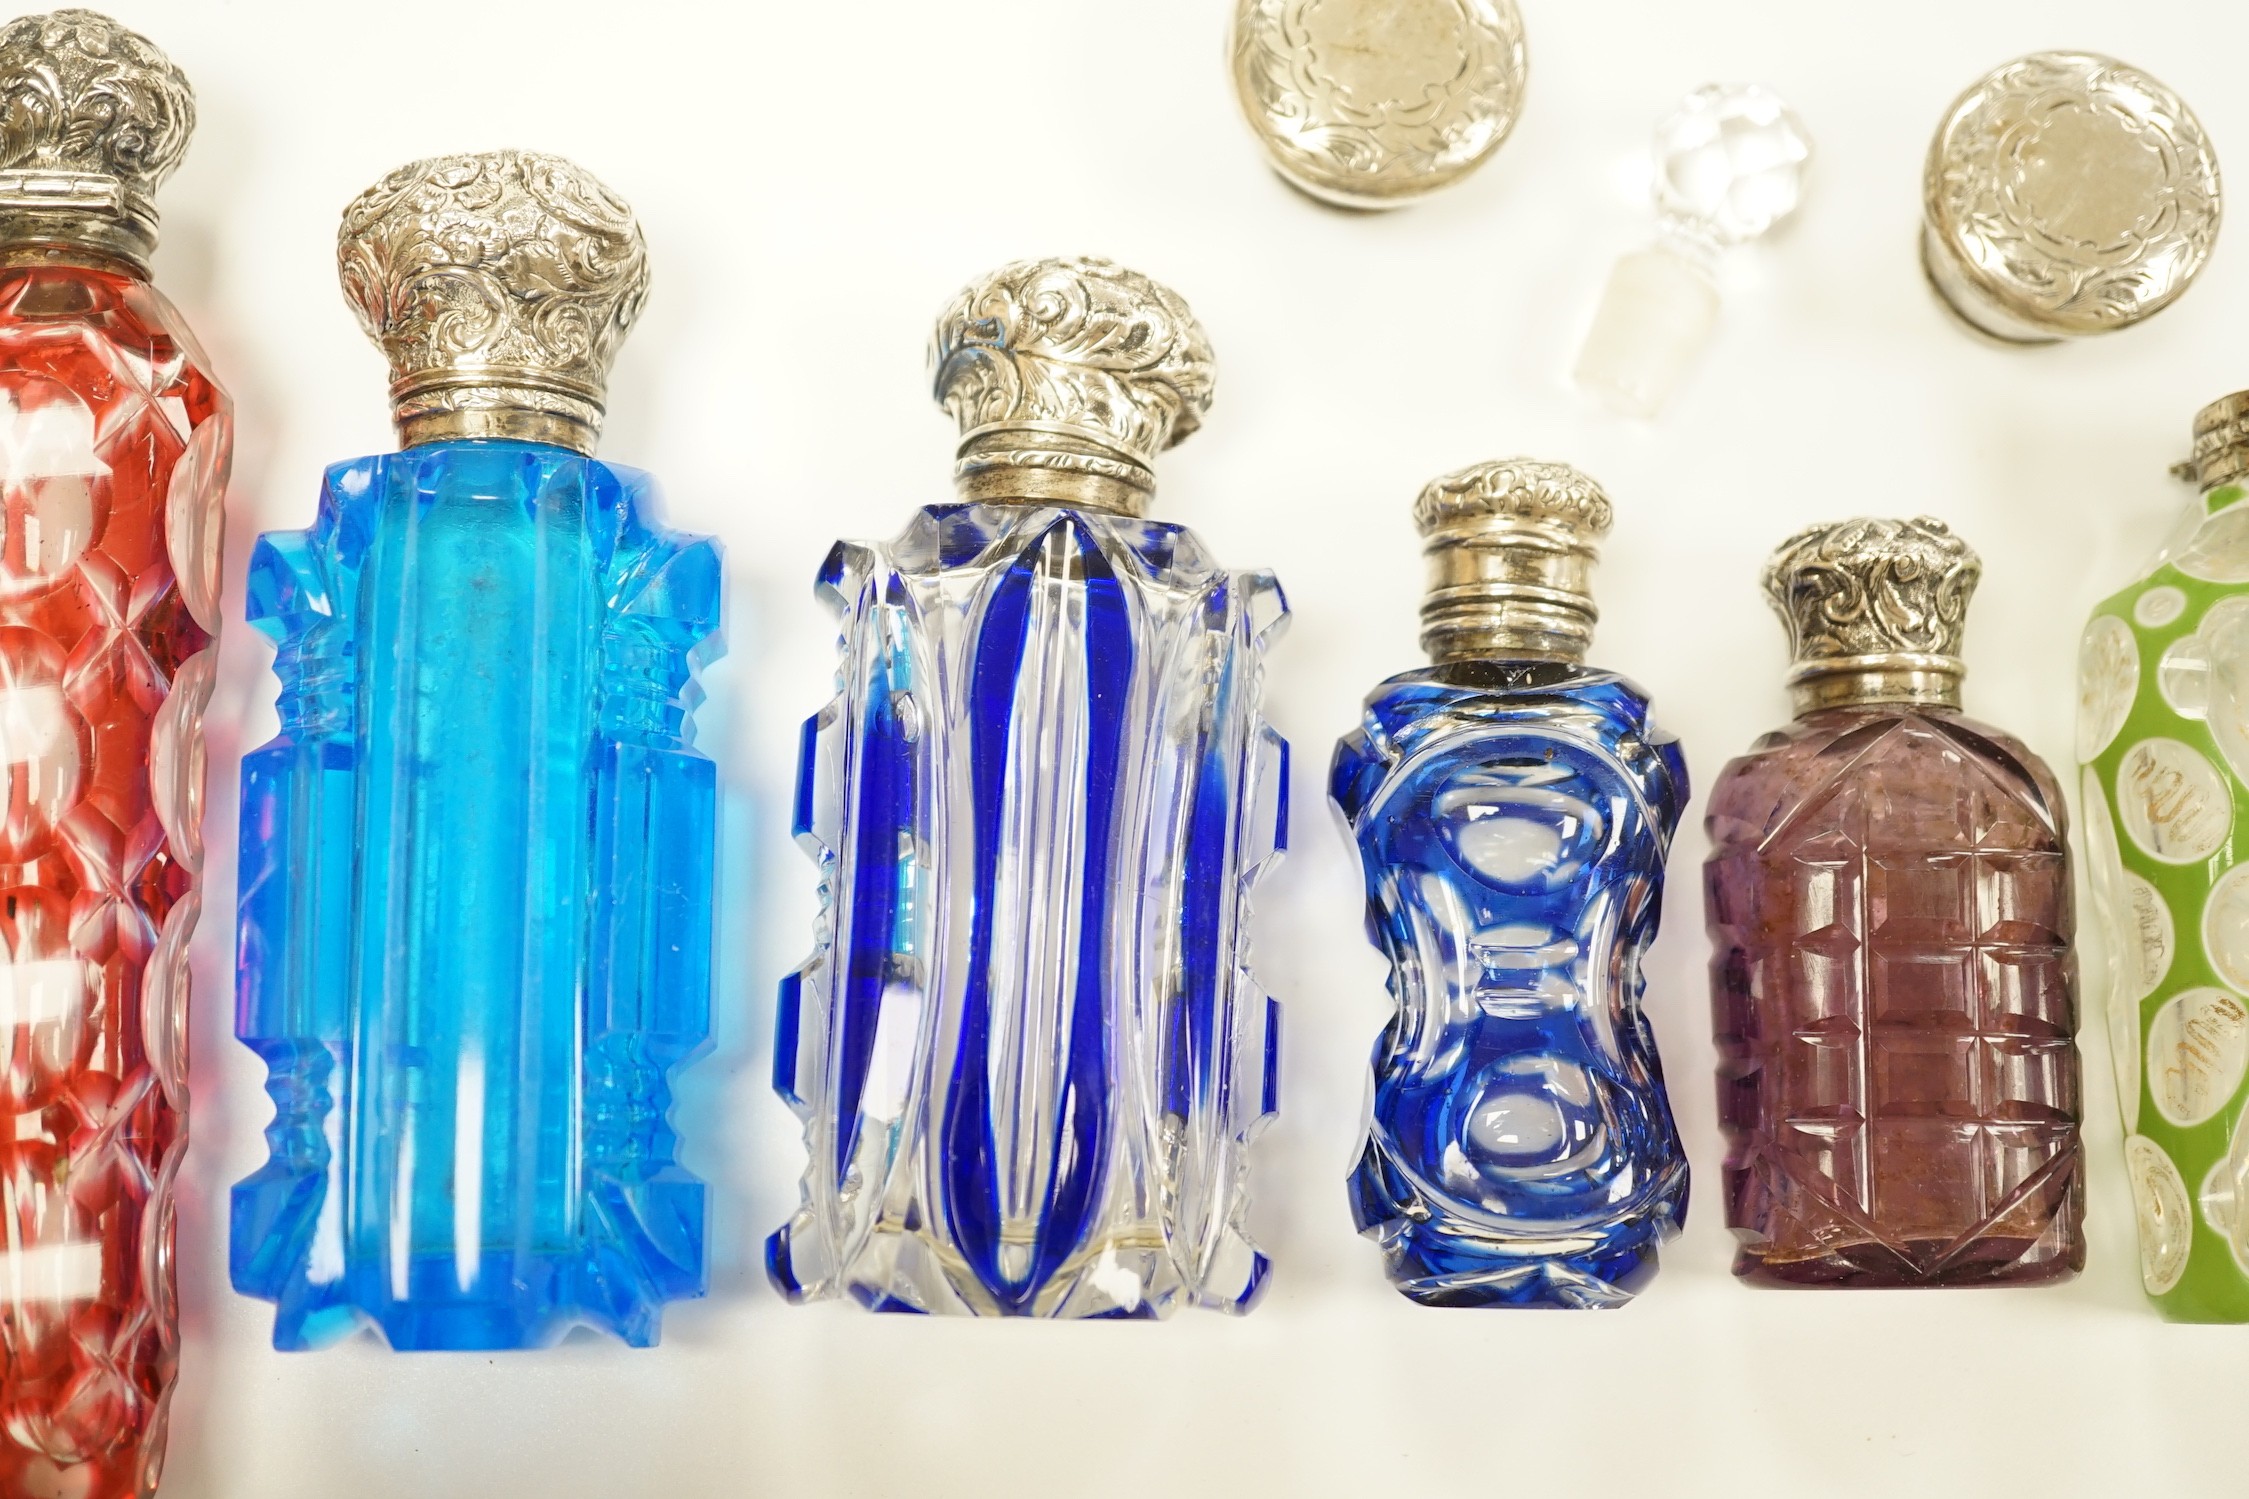 A late Victorian silver mounted cut glass scent bottle, Charles Boyton II, London, 1896, 82mm and six other late 19th/early 20th century, silver or white metal mounted coloured cut glass scent bottles (some a.f.) and two